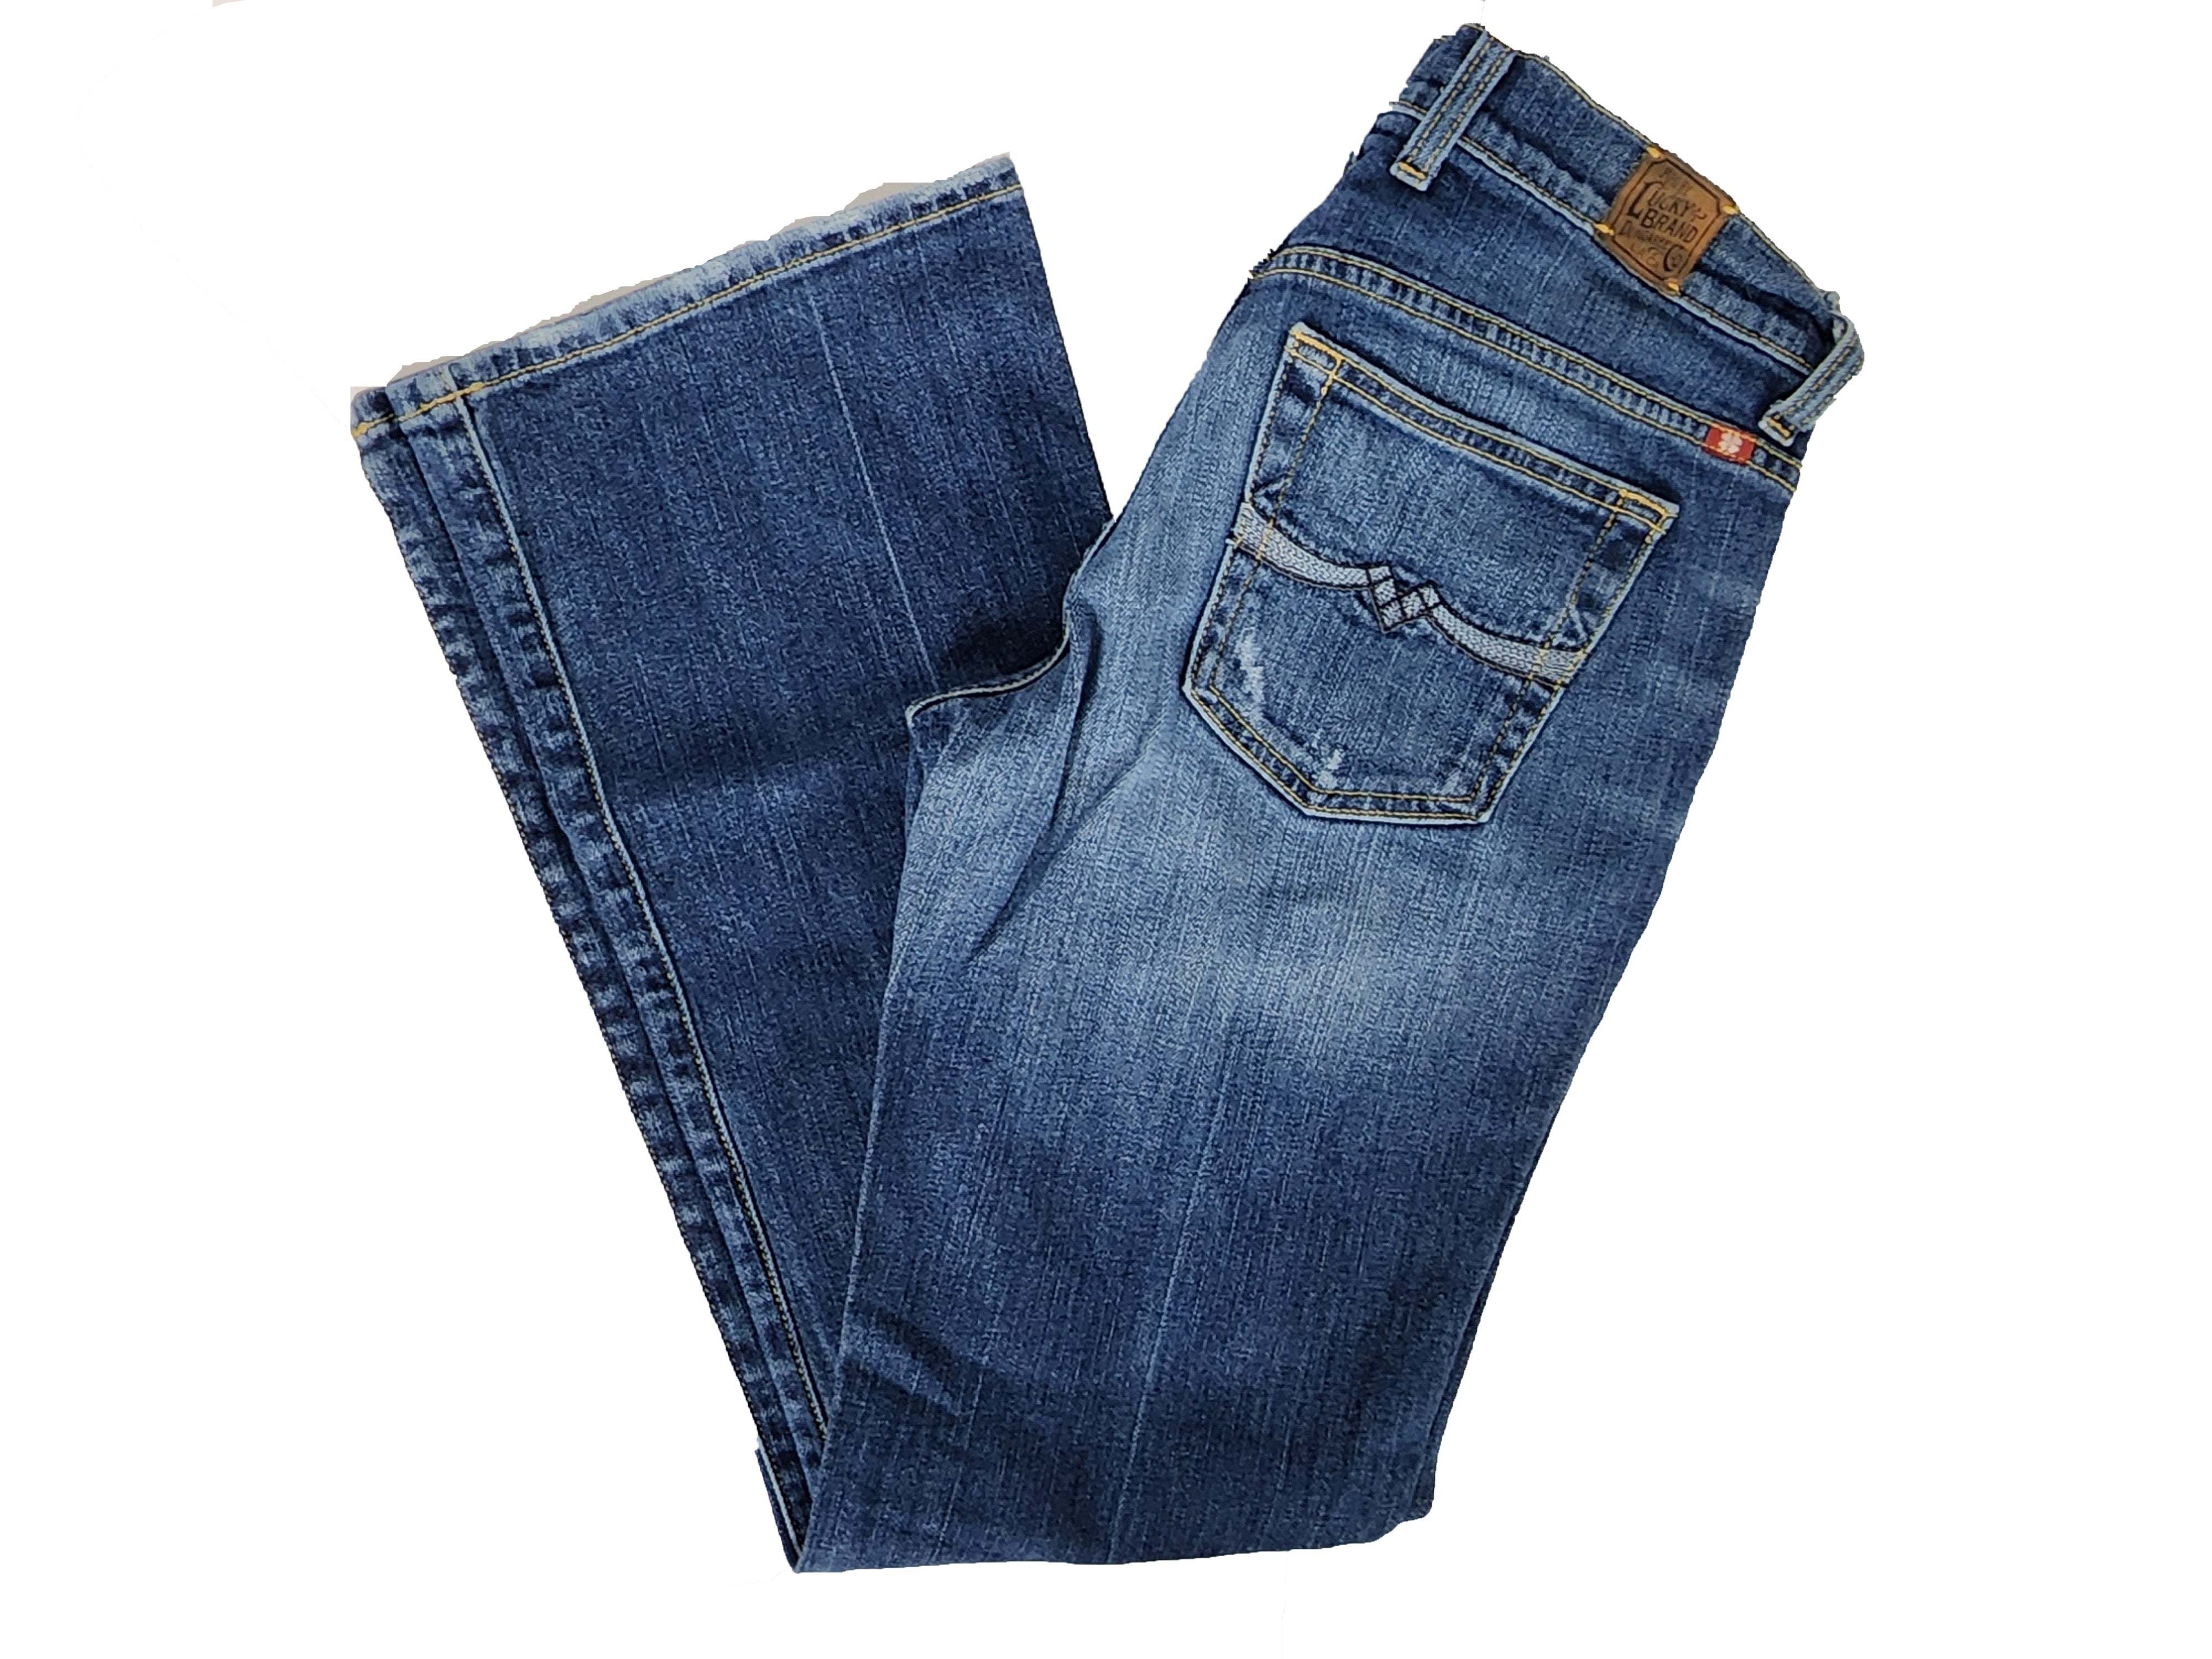 Lucky Brand Jeans  Denim jeans ideas, Lucky brand jeans, Jeans